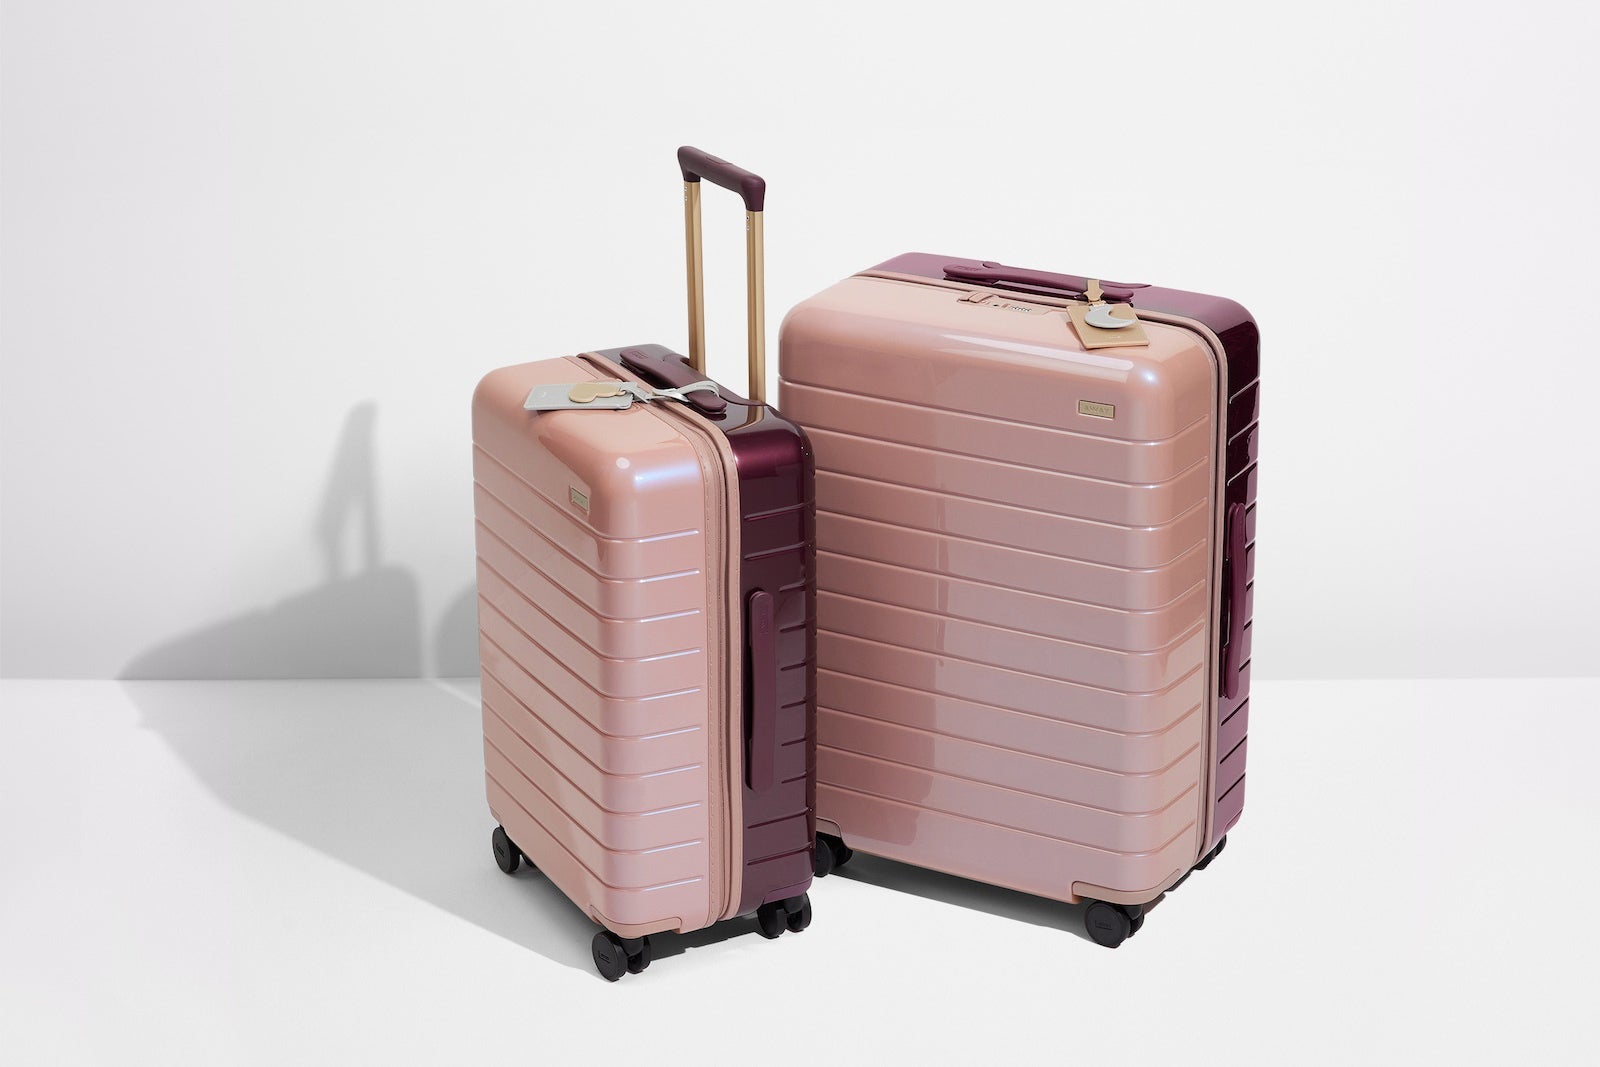 Away Holiday Chrome collection luggage